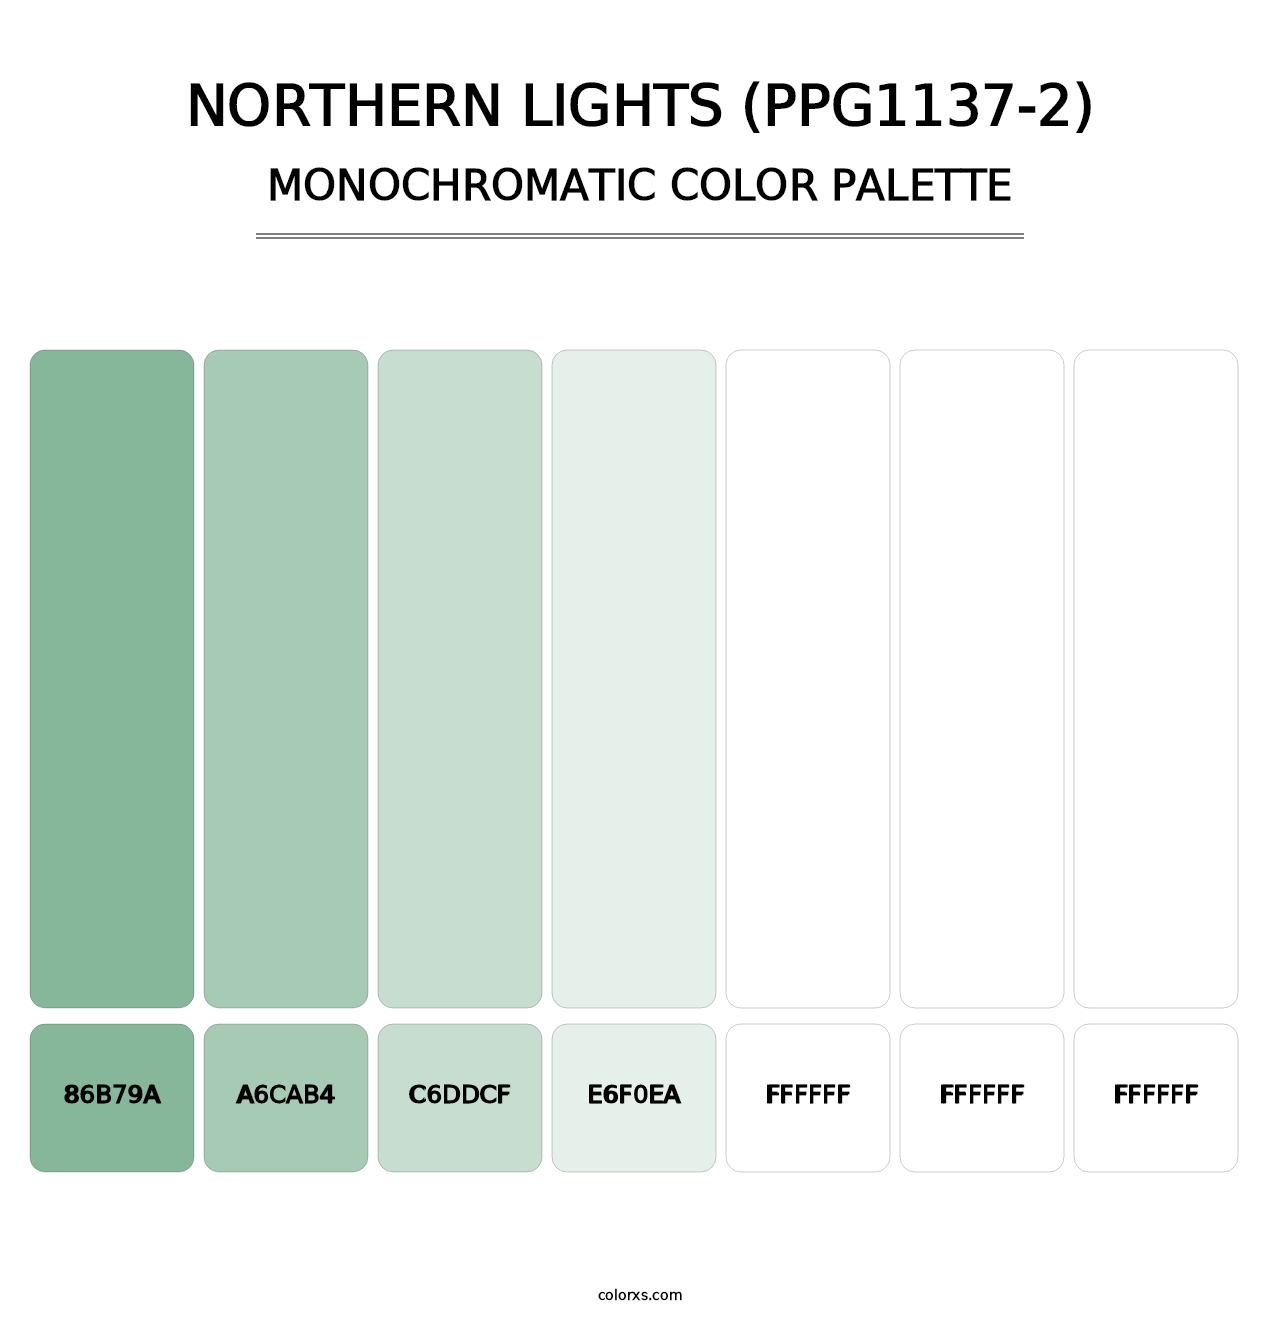 Northern Lights (PPG1137-2) - Monochromatic Color Palette